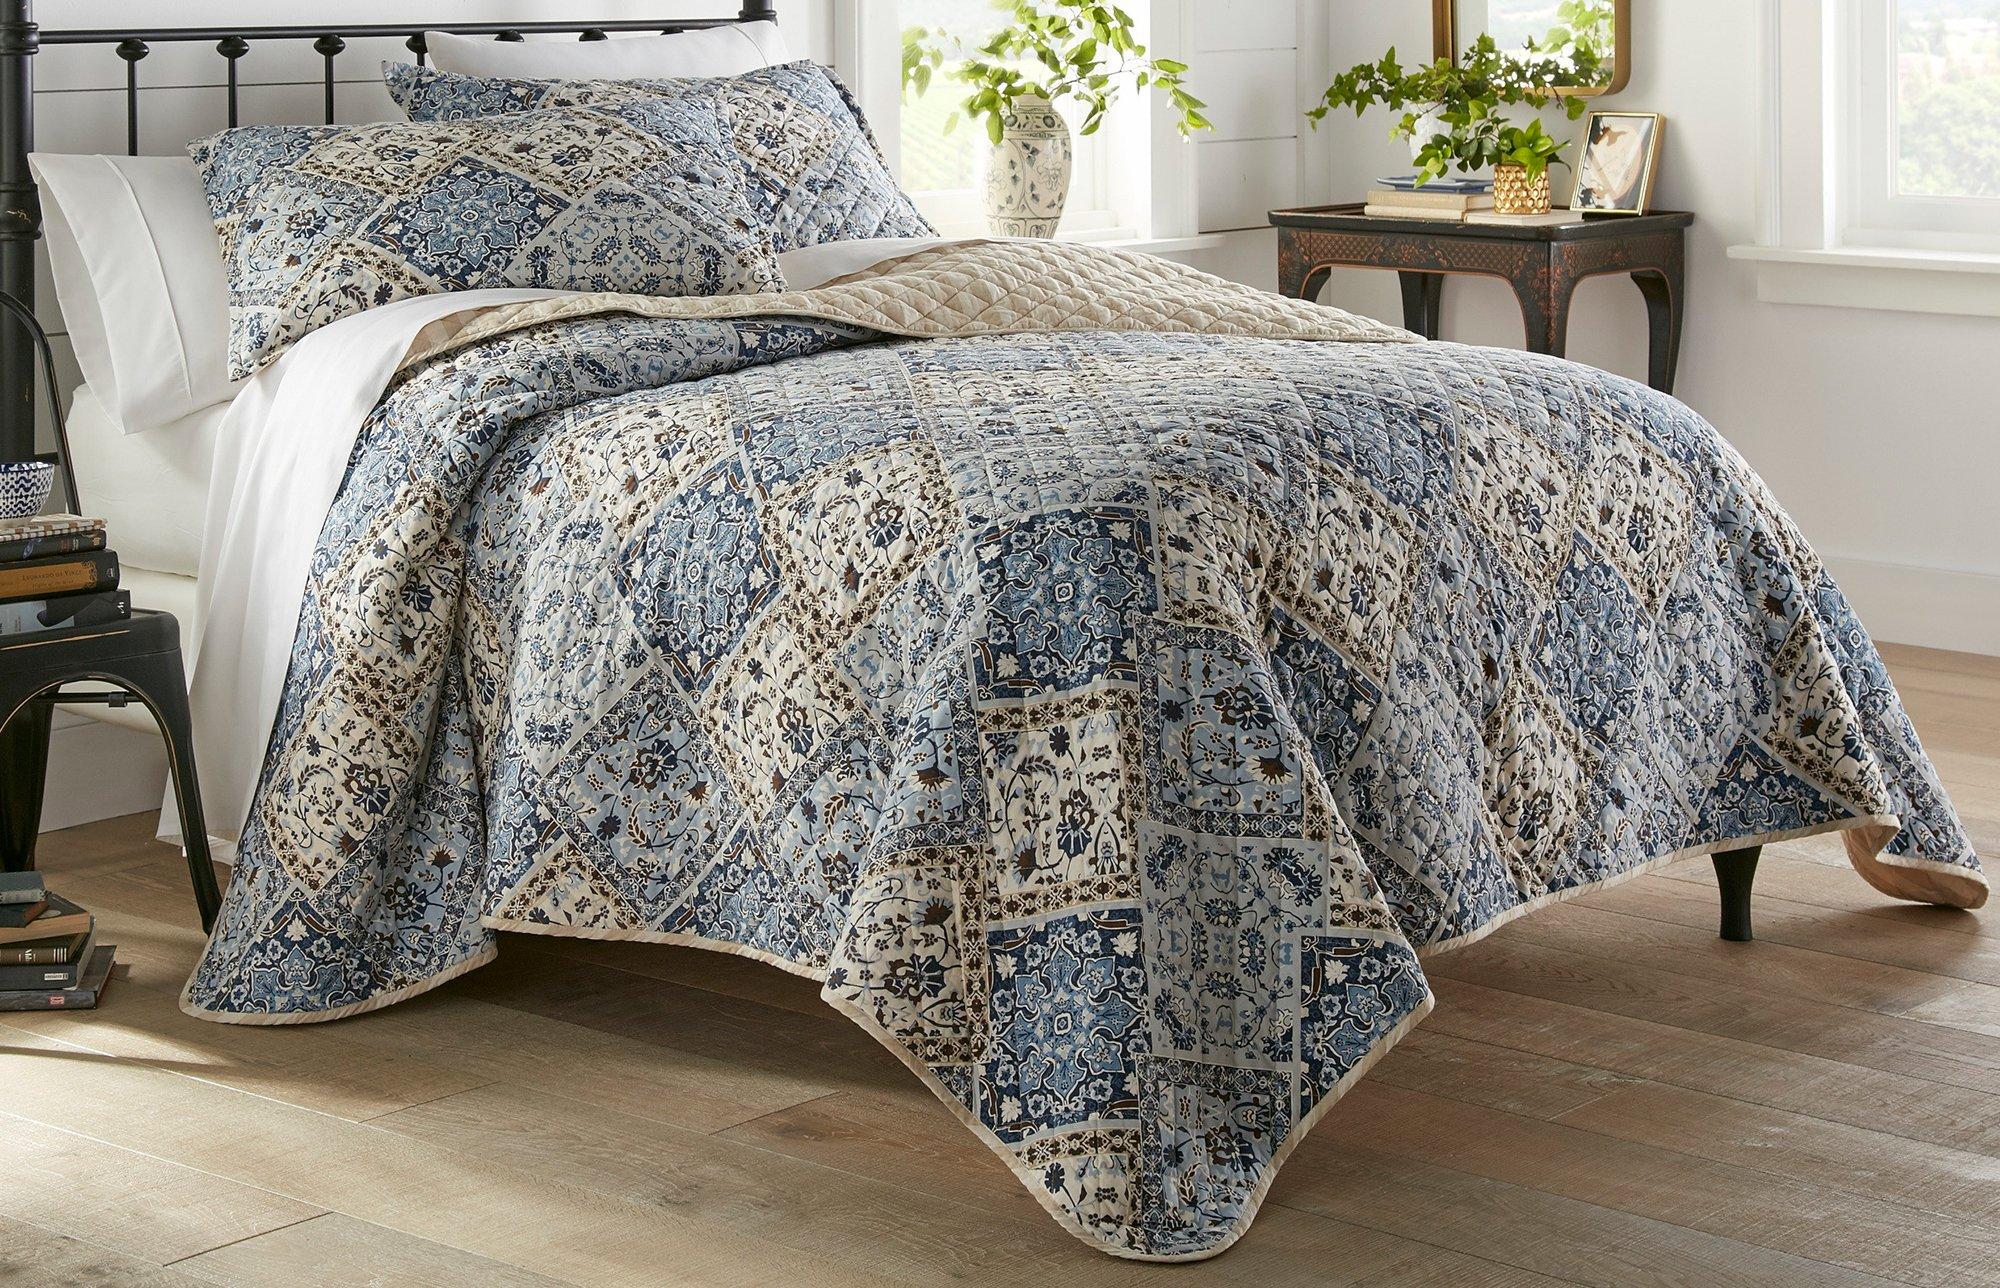 Stone Cottage Arell Quilt Set